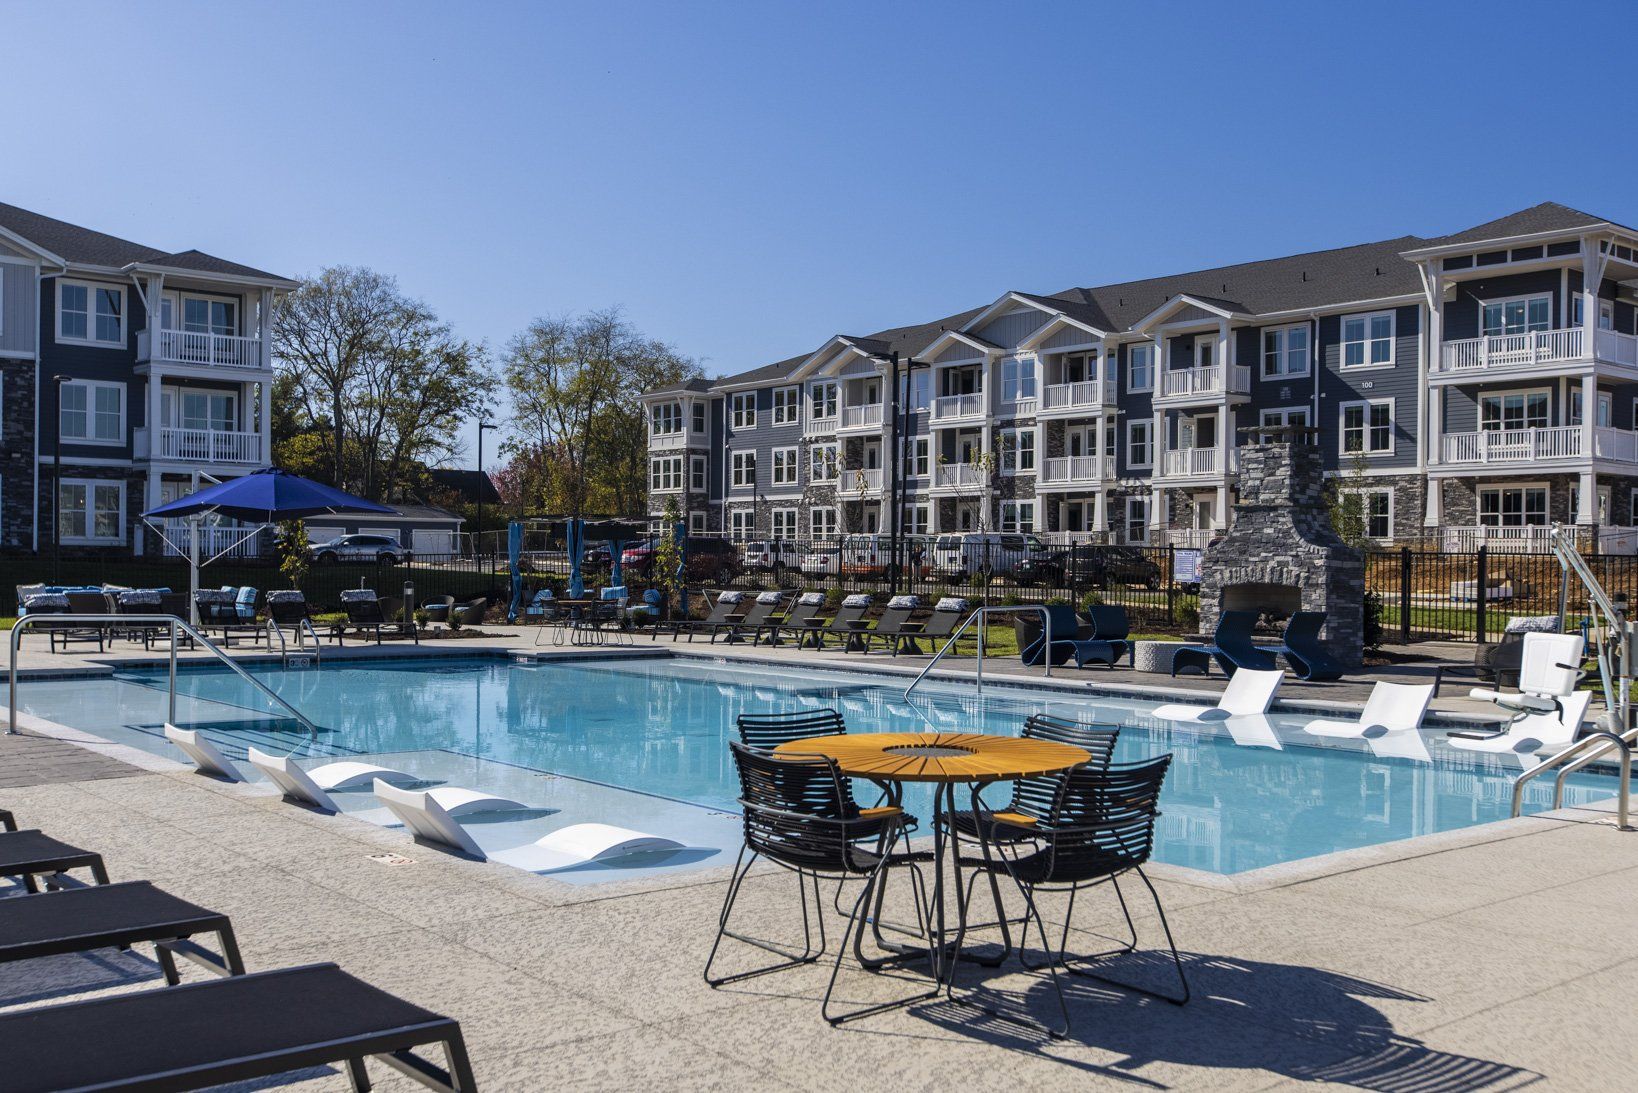 Pool outside with seating at Parc at Murfreesboro